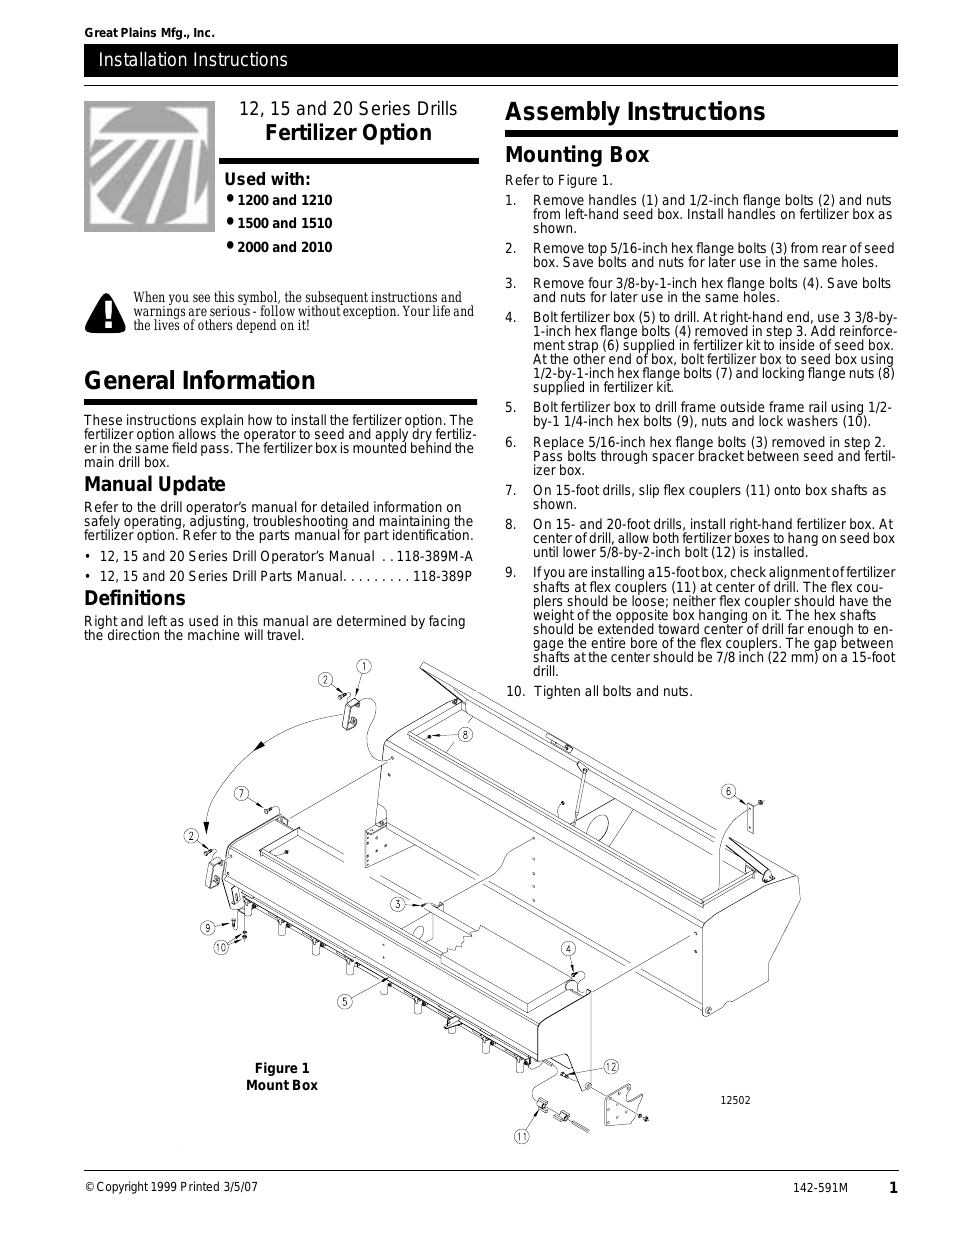 2010 Assembly Instructions